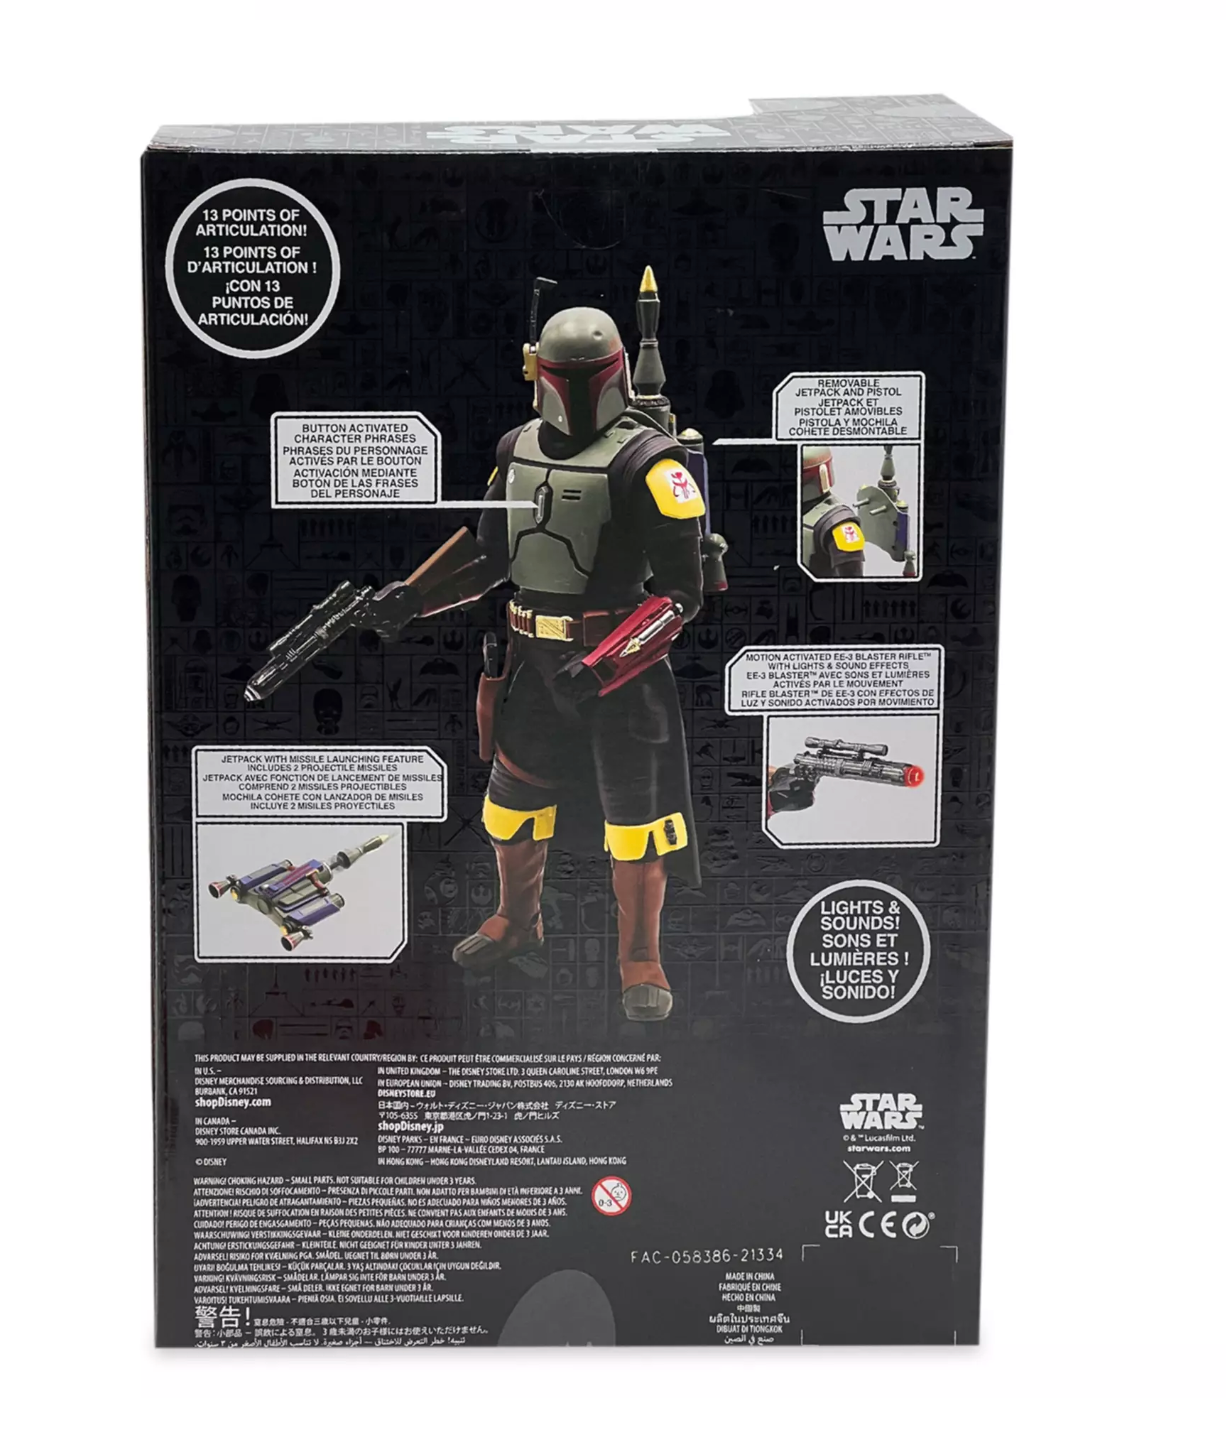 Disney Star Wars Boba Fett Talking Action Figure Power Force New with Box